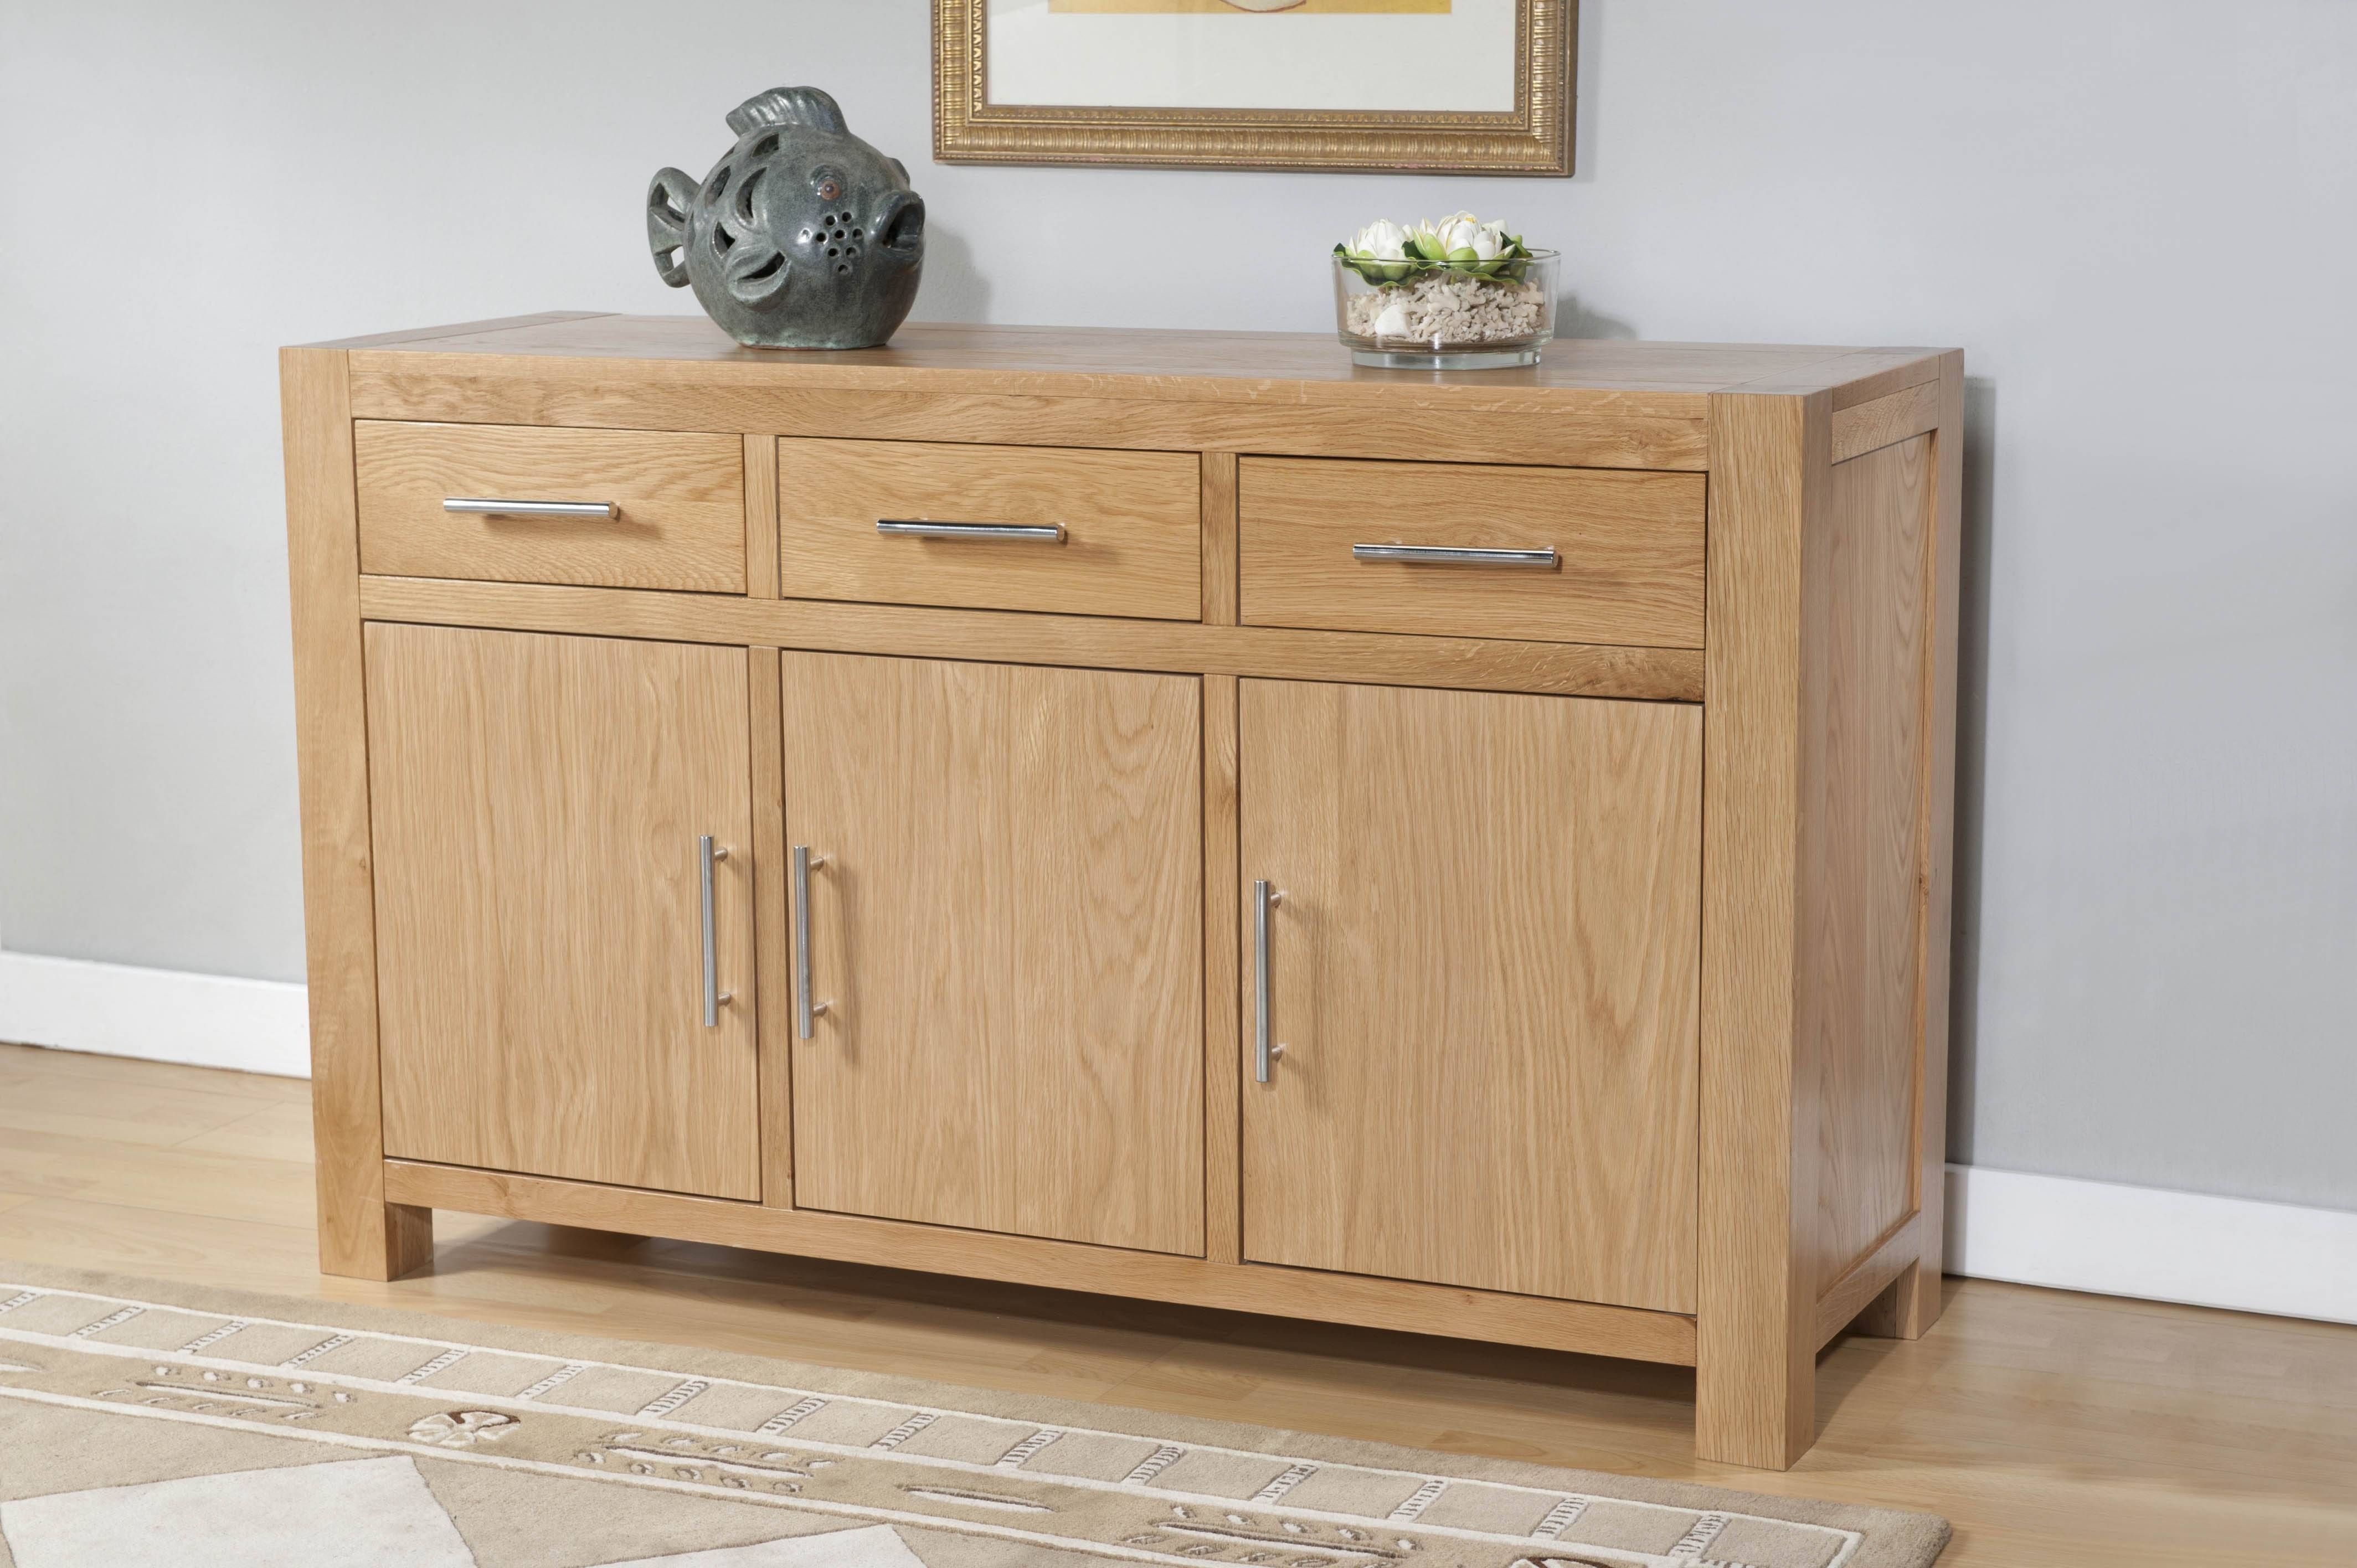 Milano Oak 3 Door 3 Drawer Large Sideboard | Oak Furniture Solutions For Most Recent Sideboards With Drawers (View 3 of 15)